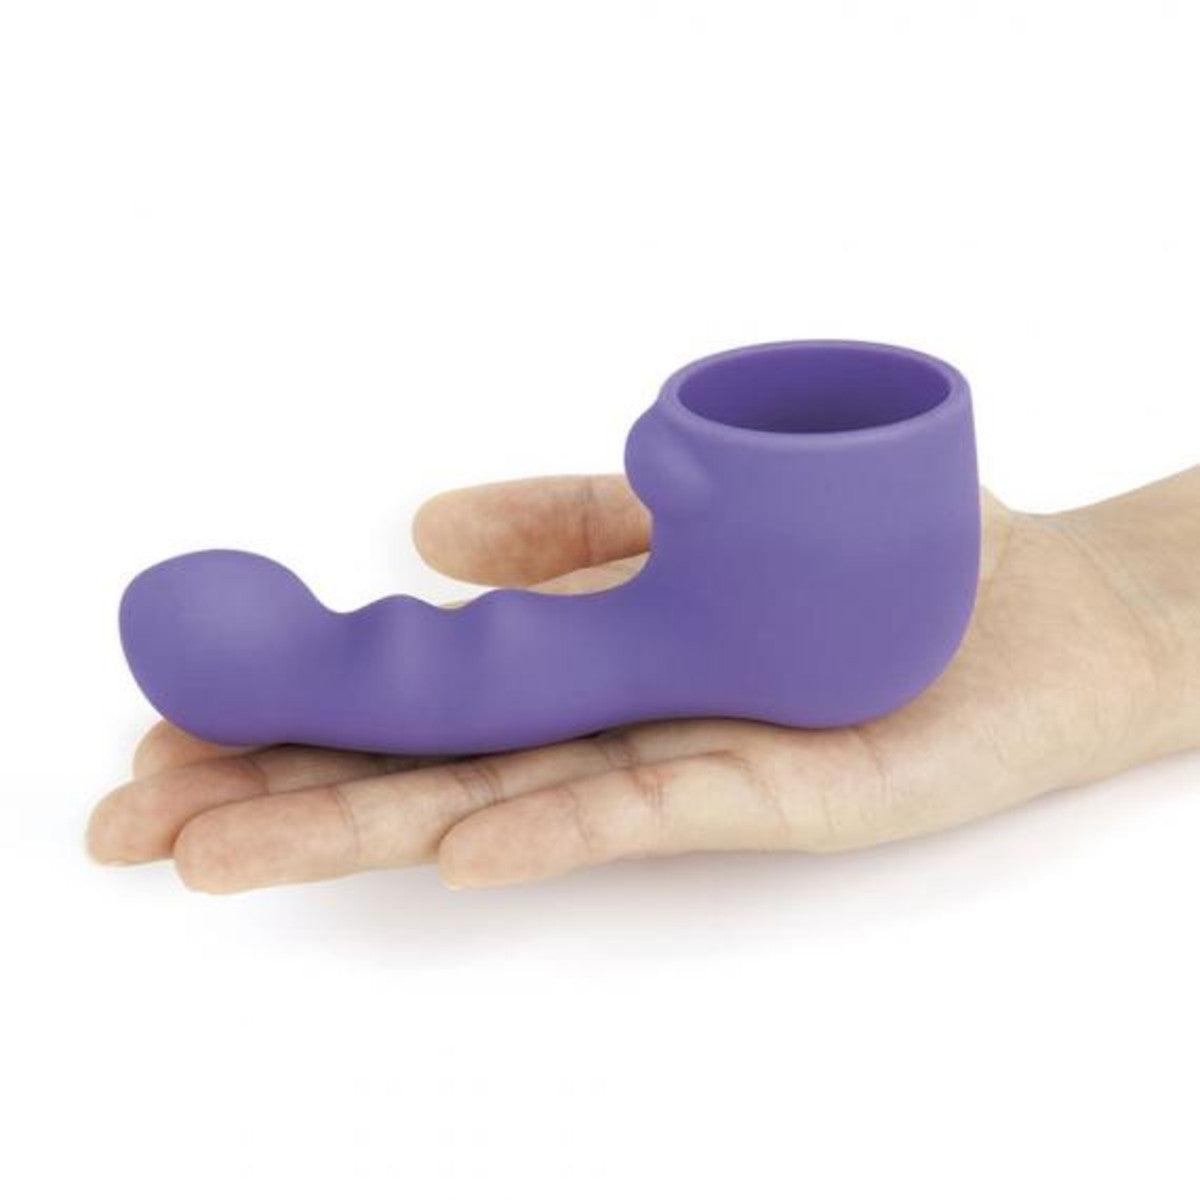 Petite Weighted Silicone Attachments: Various Styles - Passionfruit